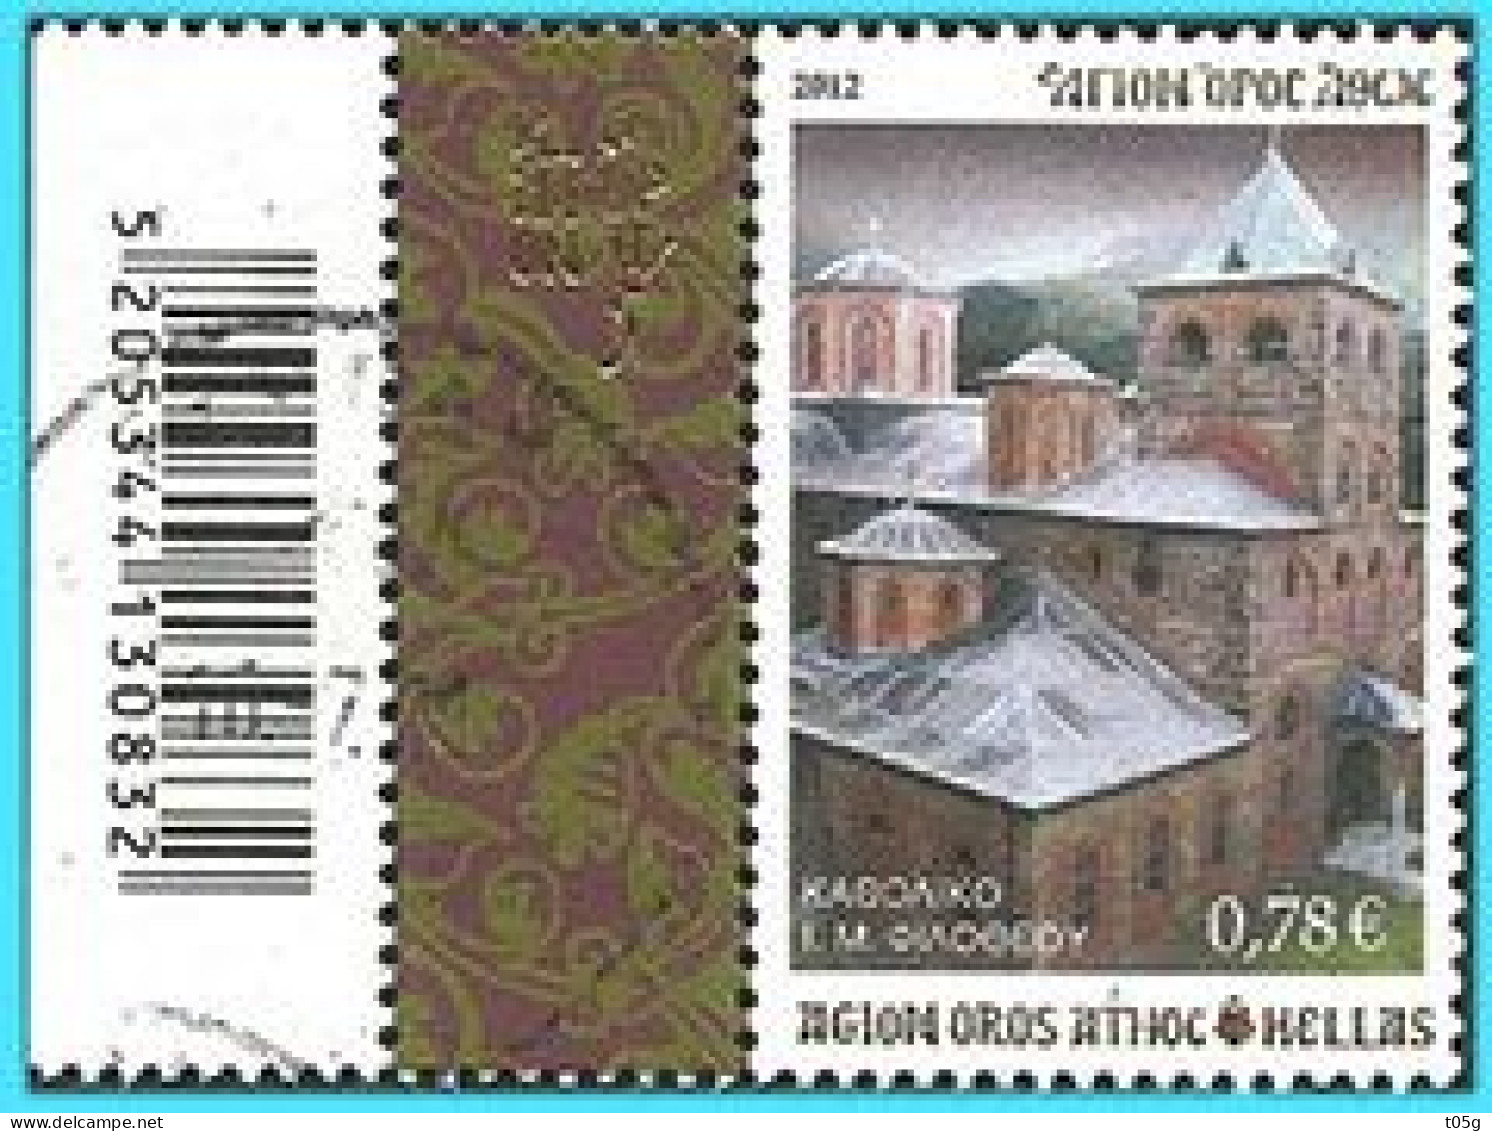 GREECE- GRECE- HELLAS - AGION OROS 2012: 0.78€  (with Barcode) From Set Used - Oblitérés